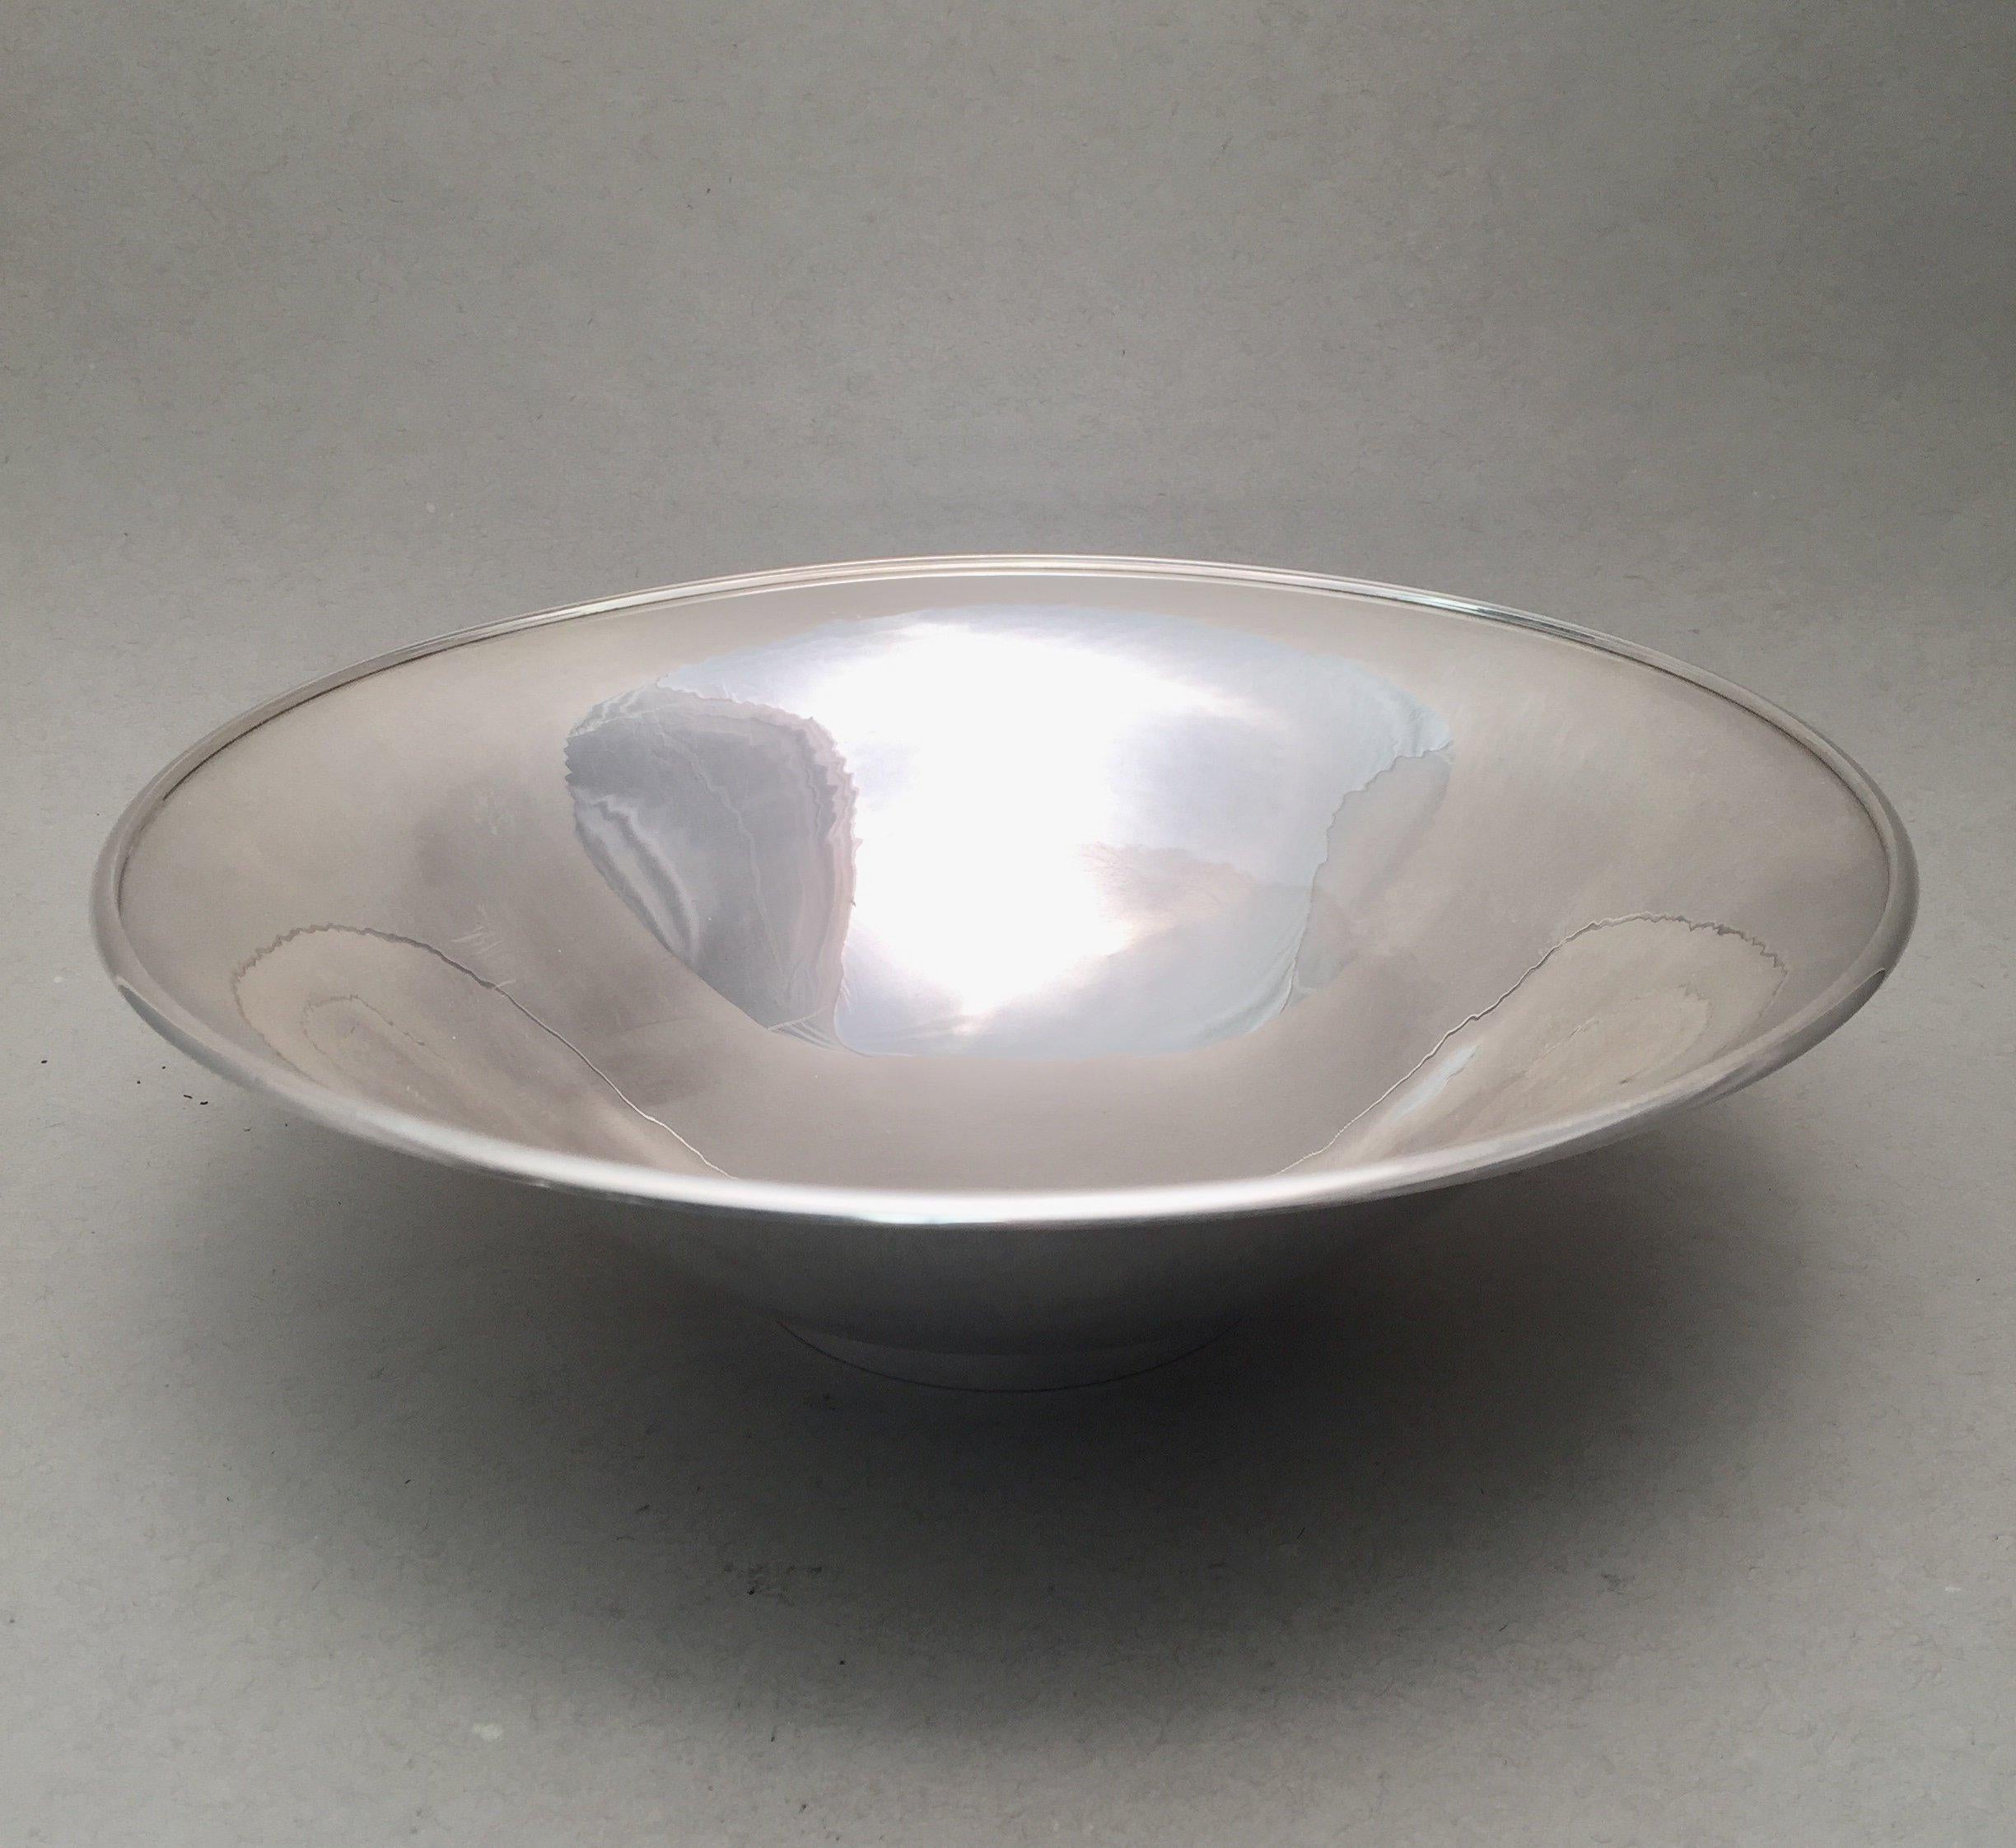 Sterling silver serving bowl in pattern 430B by Danish maker Georg Jensen. Designed in a classic and simple design, standing on base. Measuring 3 inches tall and 9 1/4 inches in diameter. Weighing 12.9 troy ounces. Bearing hallmarks as shown.